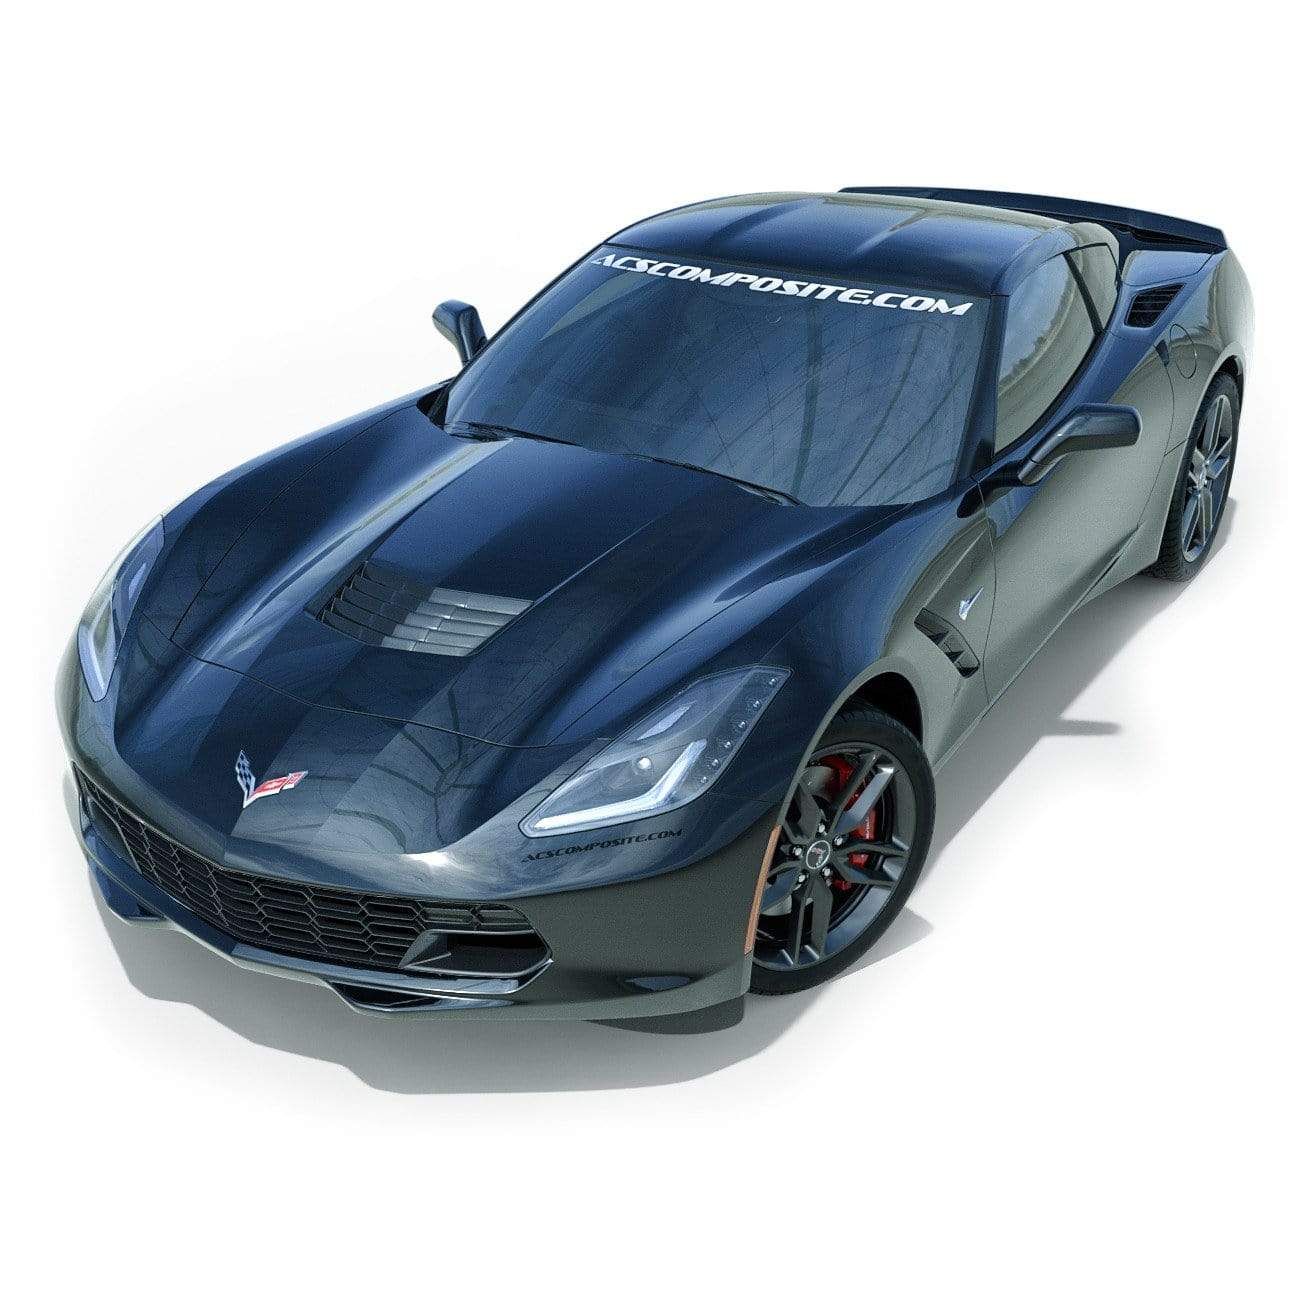 ACS Z06 Carbon Flash Grille for C7 Corvette with SKU 45-4-135, boosts front-end airflow by 17% and adds a sleek touch to your vehicle. Optional camera provision for hassle-free upgrade.